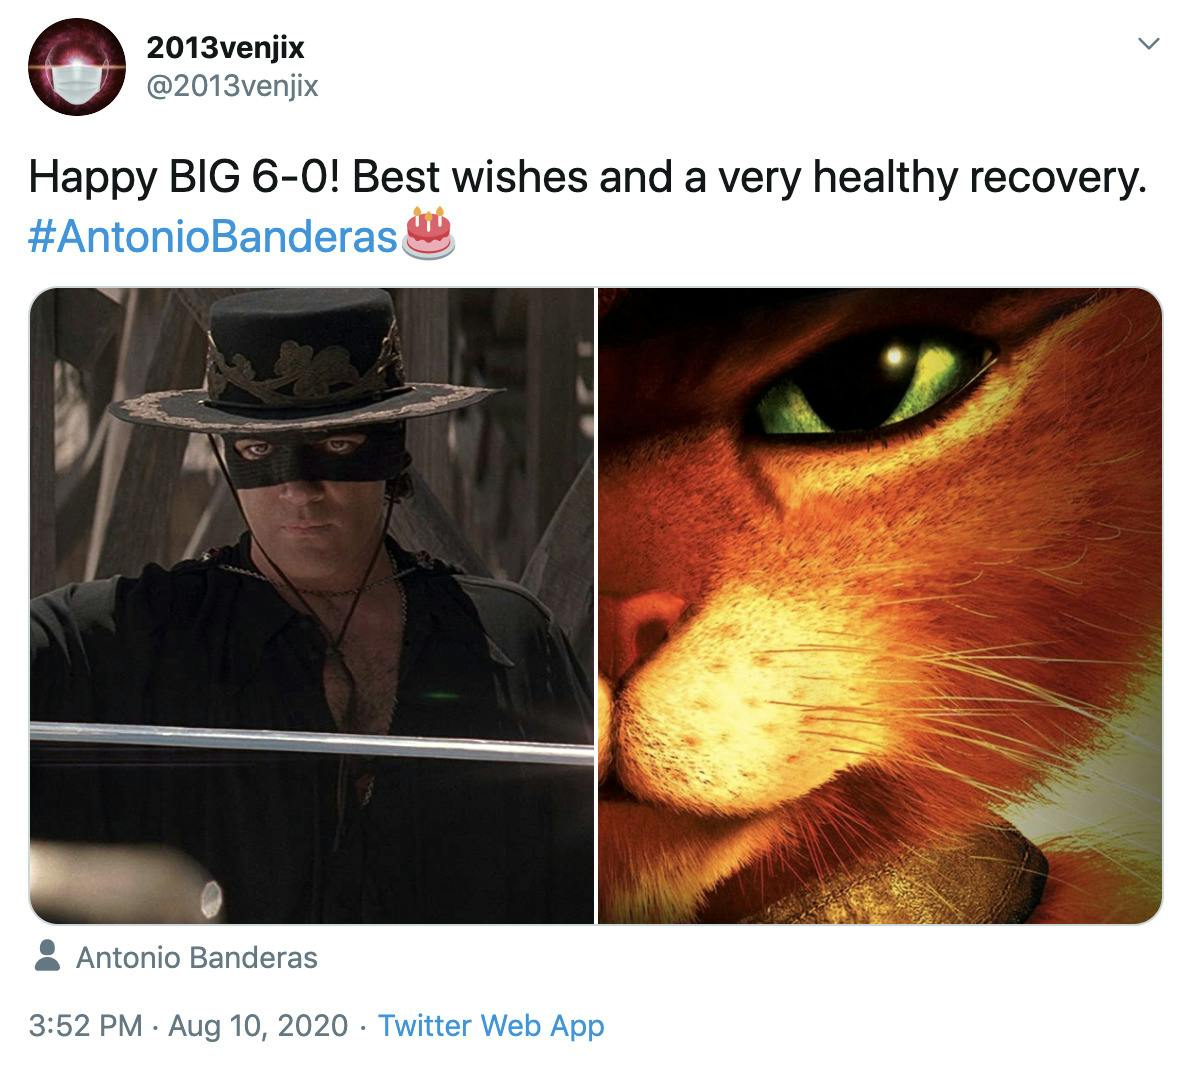 "Happy BIG 6-0! Best wishes and a very healthy recovery. #AntonioBanderas🎂" picture of him as Zorro and picture of Puss in Boots